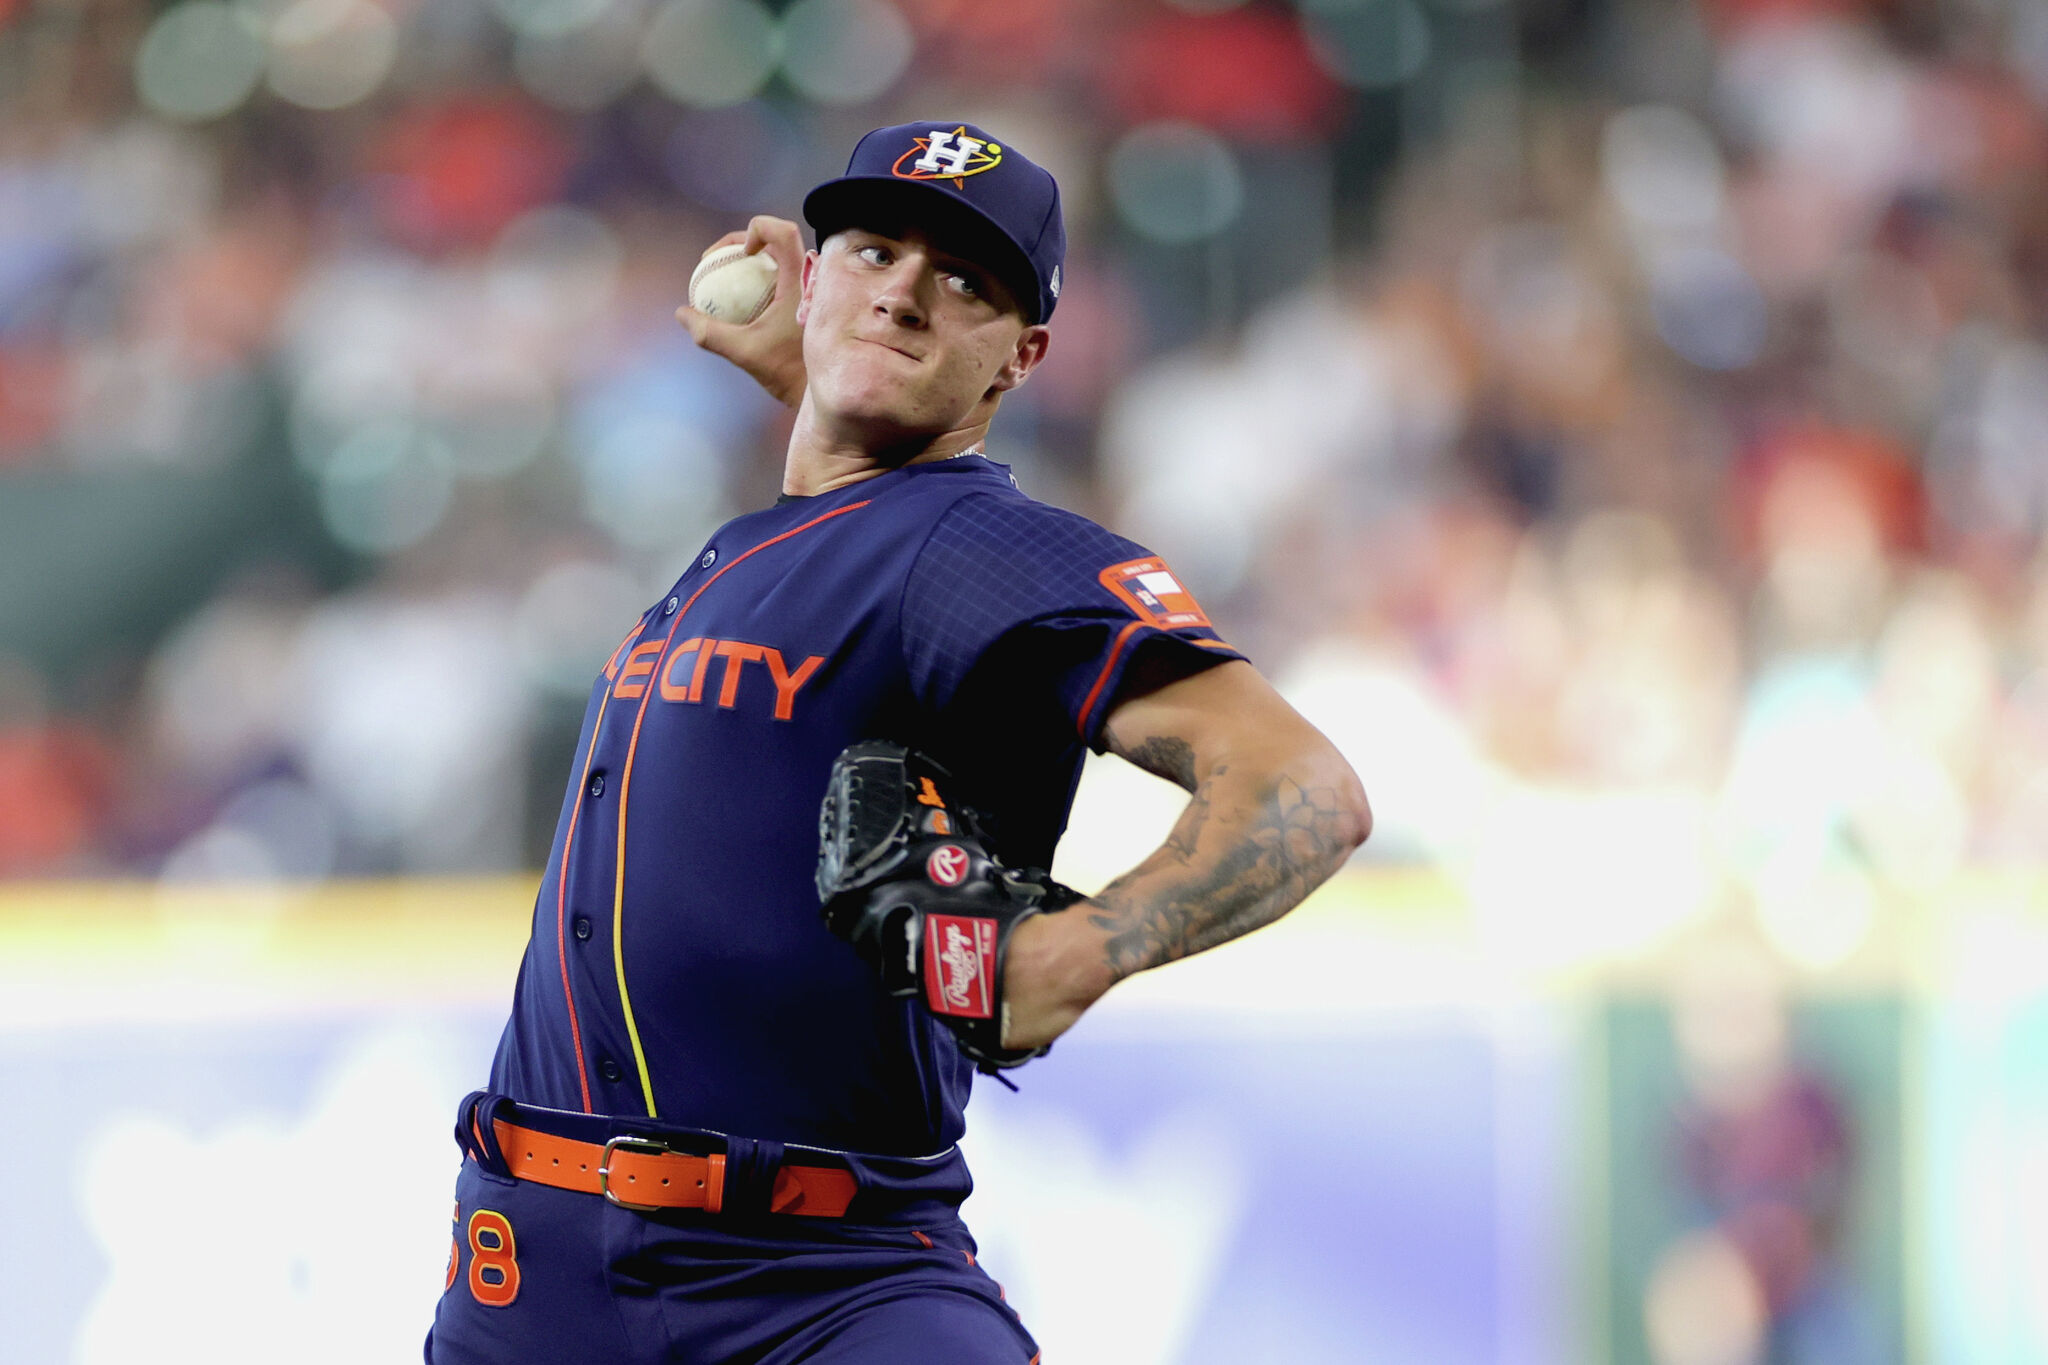 Hunter Brown, 1 of Astros' top prospects, wins for Houston in MLB debut  against Texas Rangers on Monday - ABC13 Houston